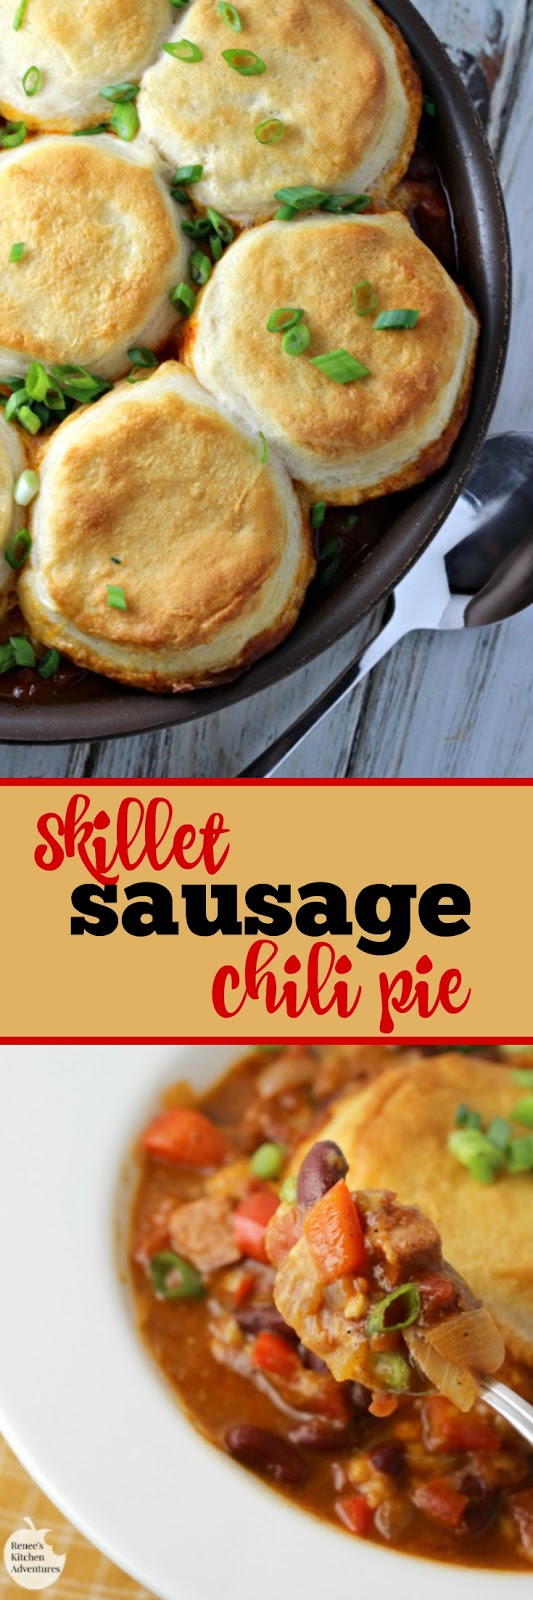 Skillet Cheesy Sausage Chili Pie | by Renee's Kitchen Adventures - Easy recipe for a one pan chili pie made with sausage and topped with biscuits and cheese! A great easy dinner recipe! #DeliciousDinners #ad #RKArecipes 